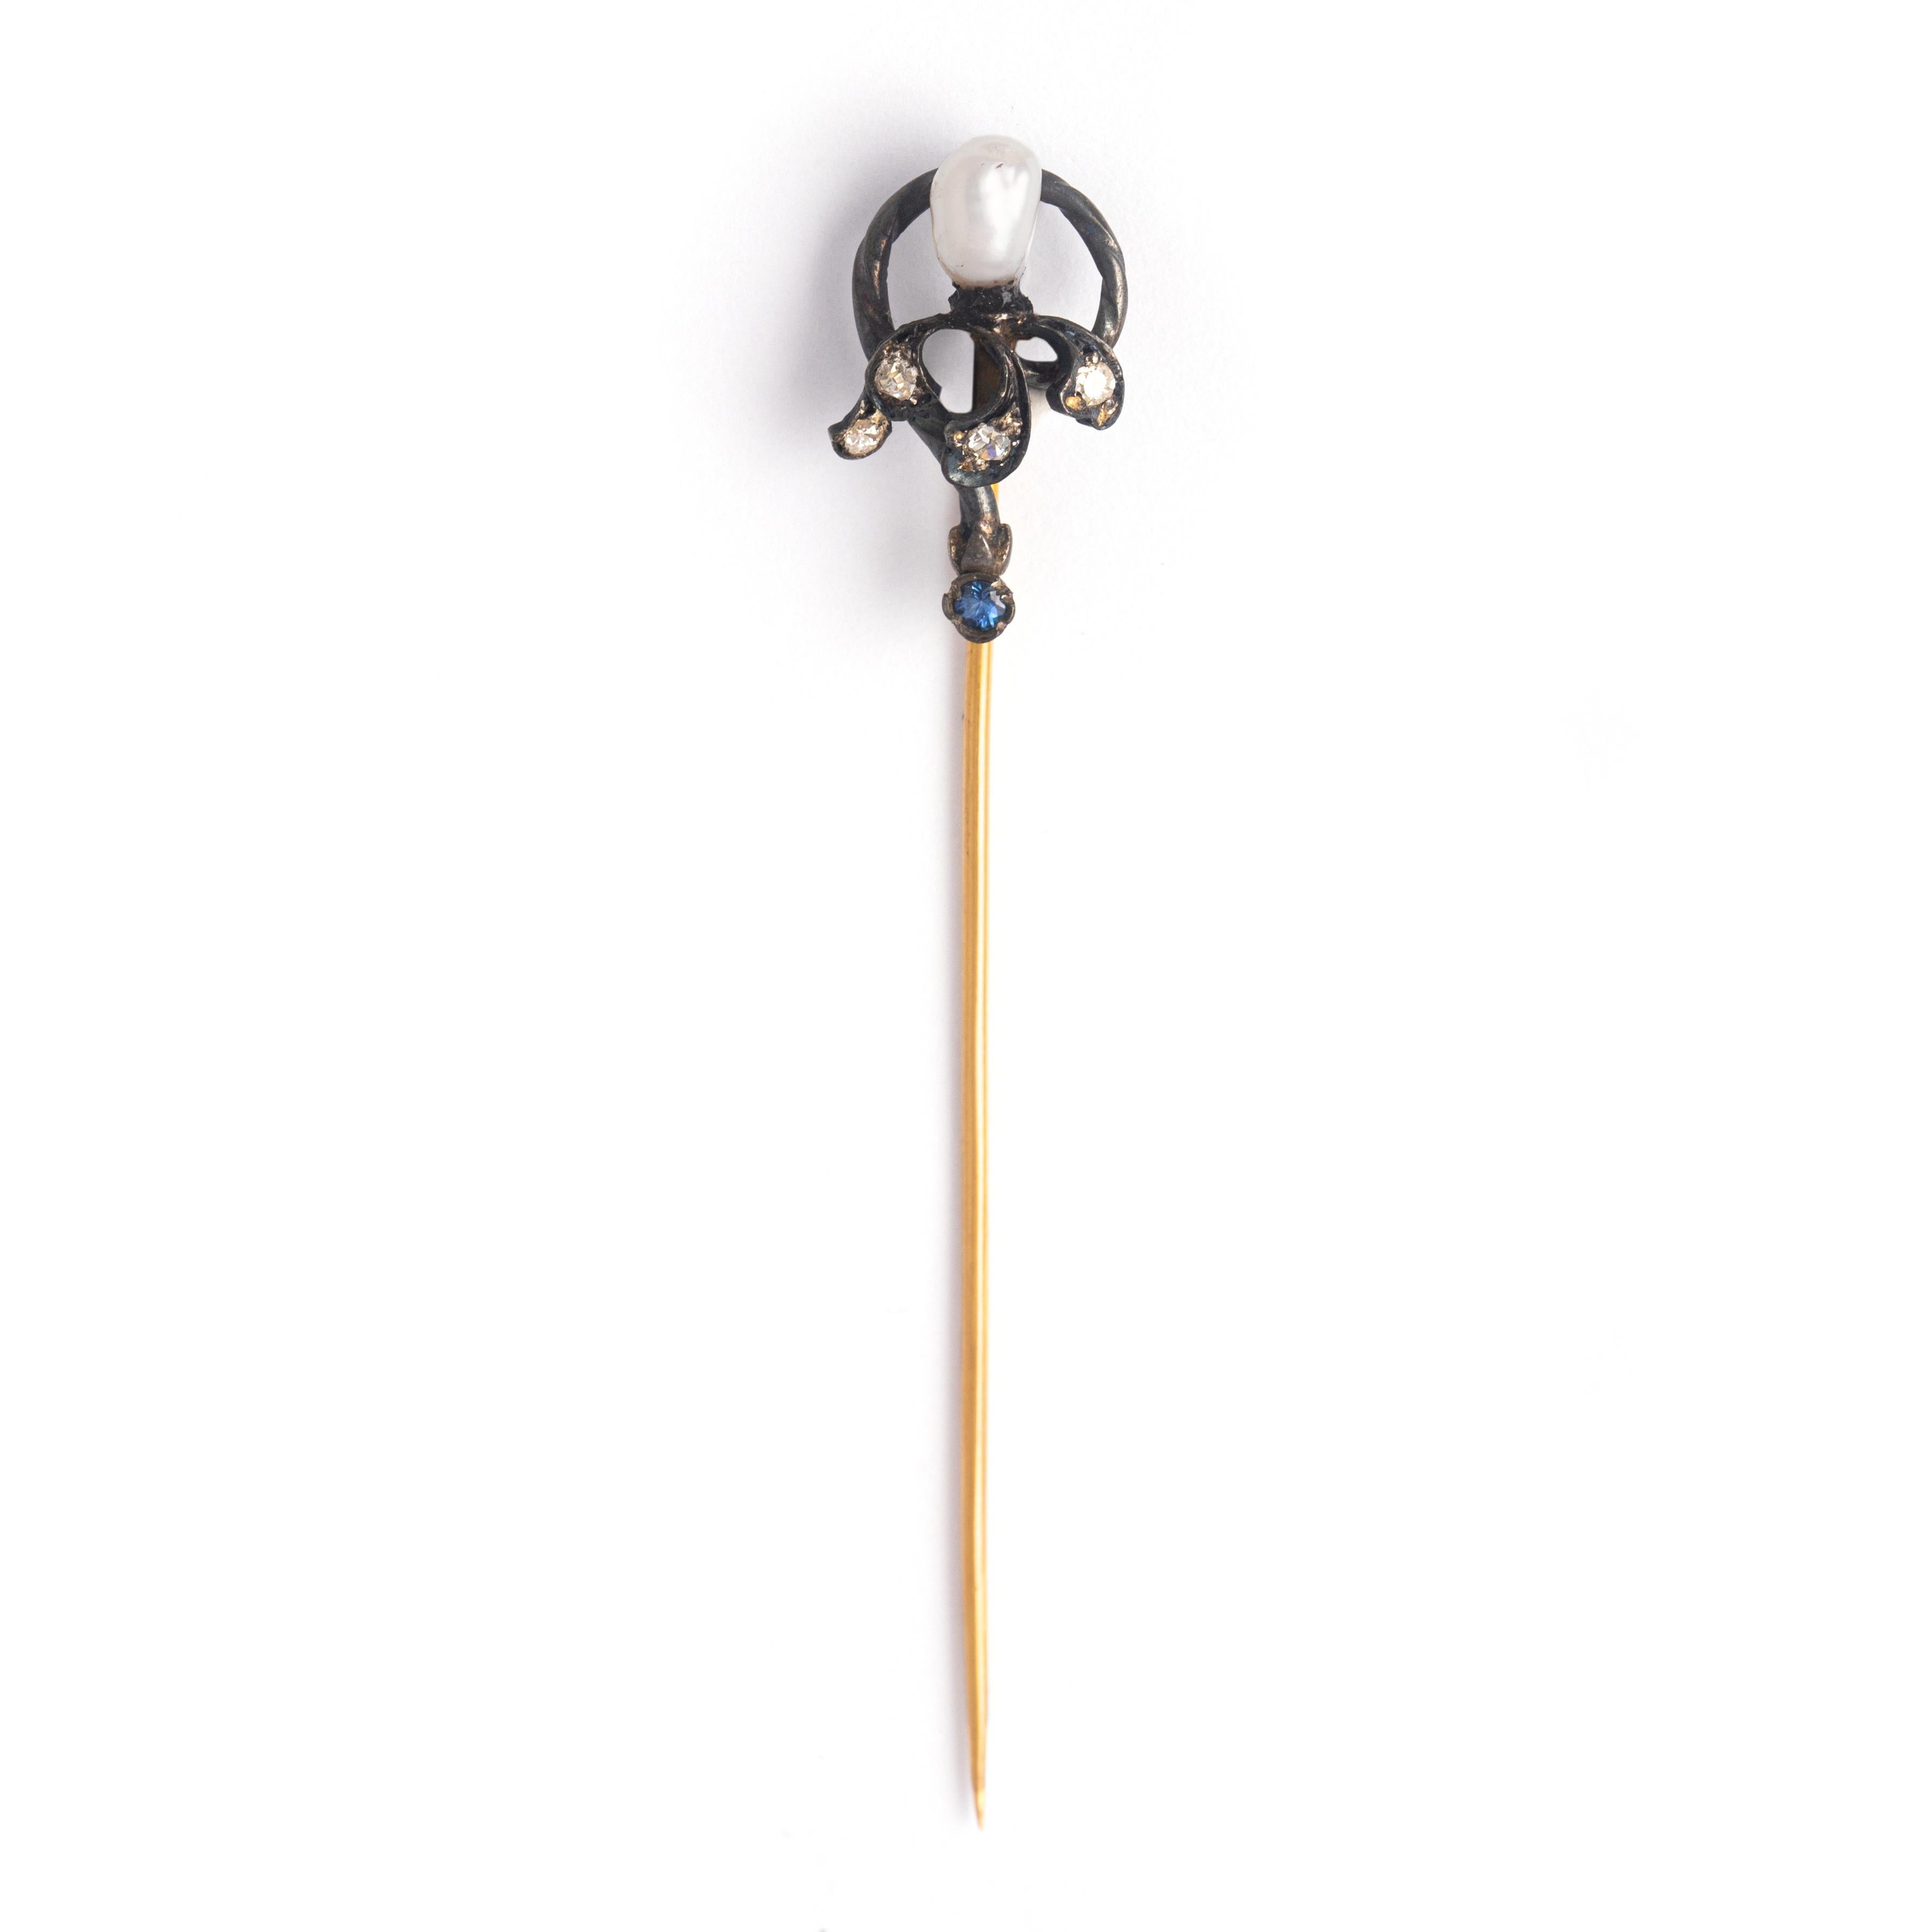 Antique Silver Gold Pin Pearl Diamond.

Dimensions: 1.80 x 1.25 centimeters.
Height (including pin): 6.70 centimeters. 

Total gross weight: 1.95 grams.